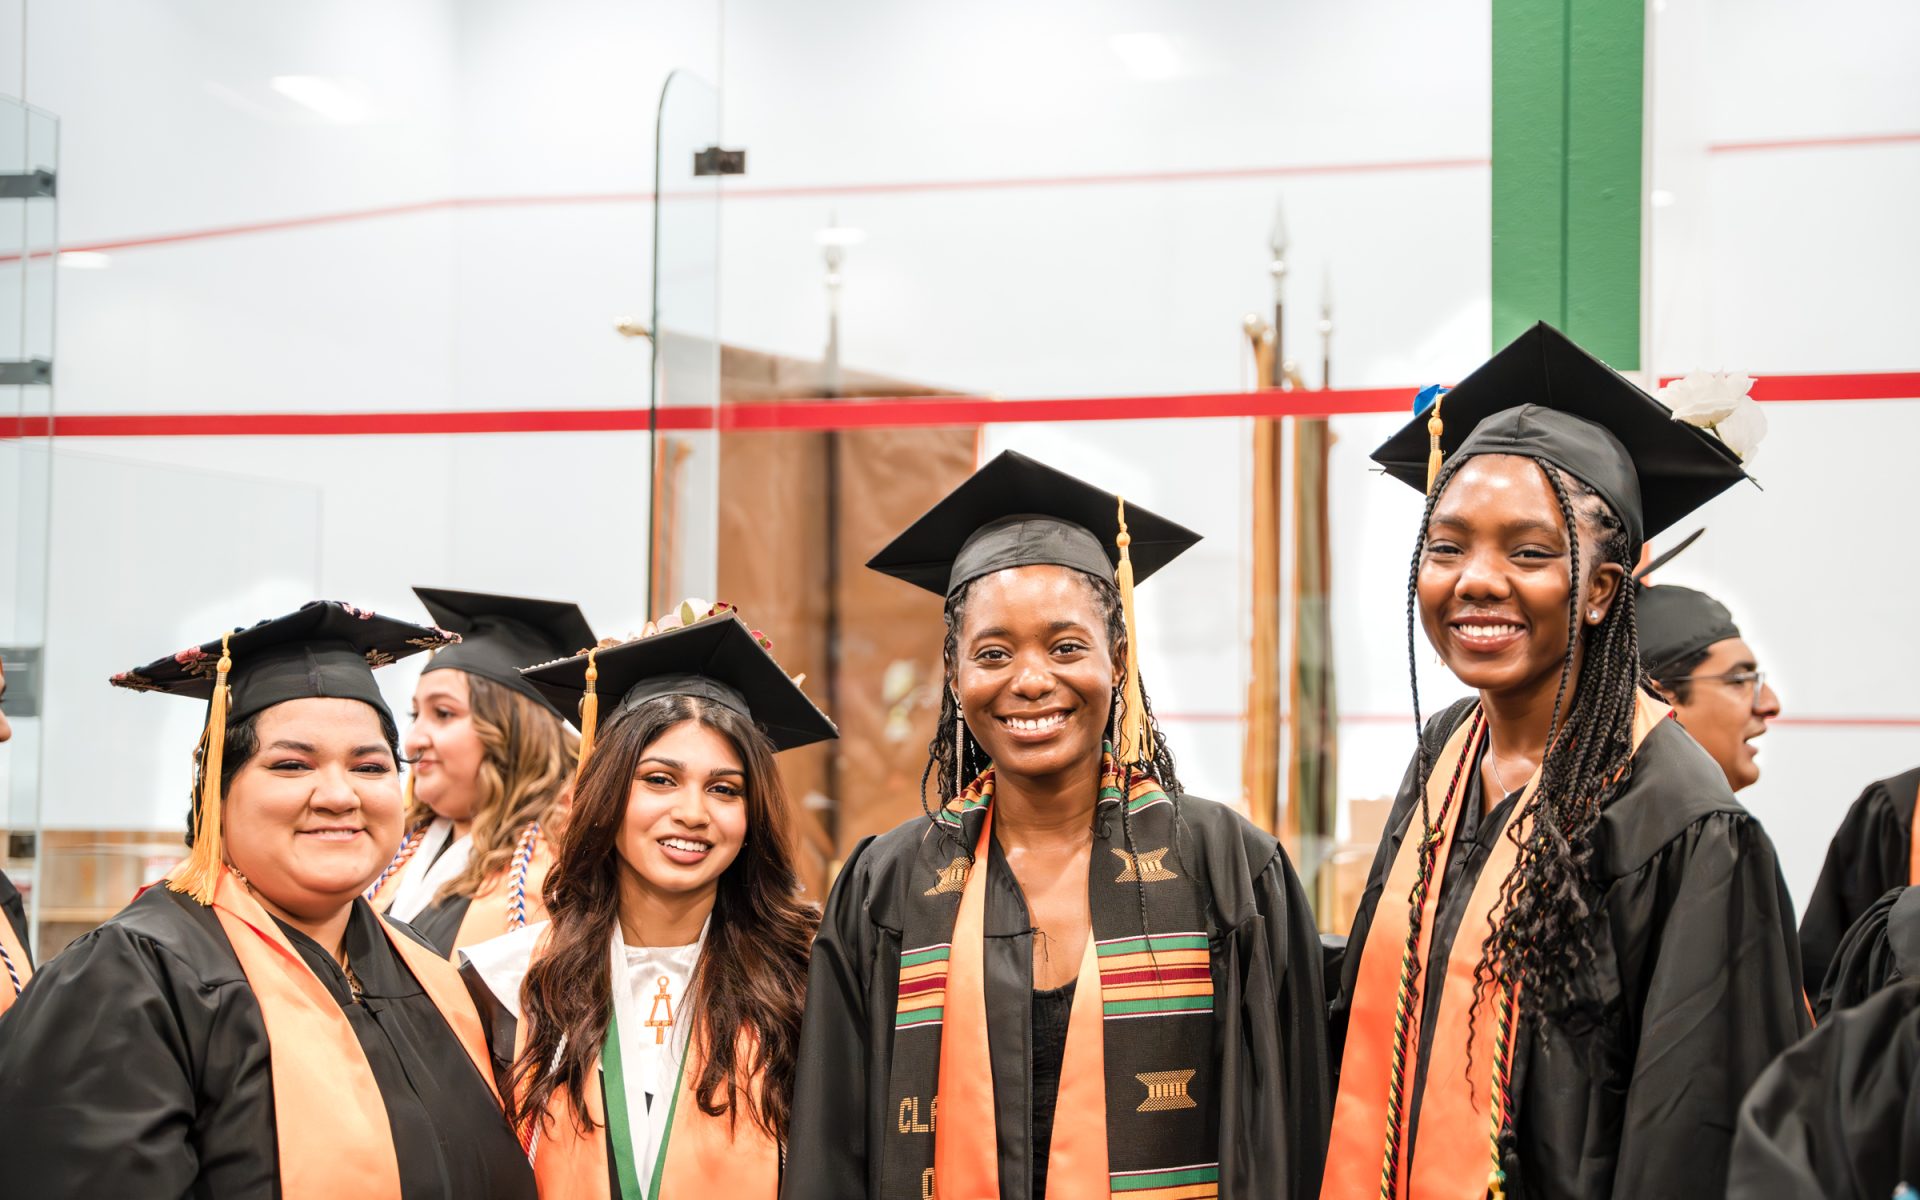 Biomedical engineering graduates prepped for their big moment. From left, Ashley Guzman, Ritika Nayak, Morolake Omiyale and Emmanuella Nweke straightened their stoles and cords for Tau Beta Pi and for the National Society of Black Engineers.